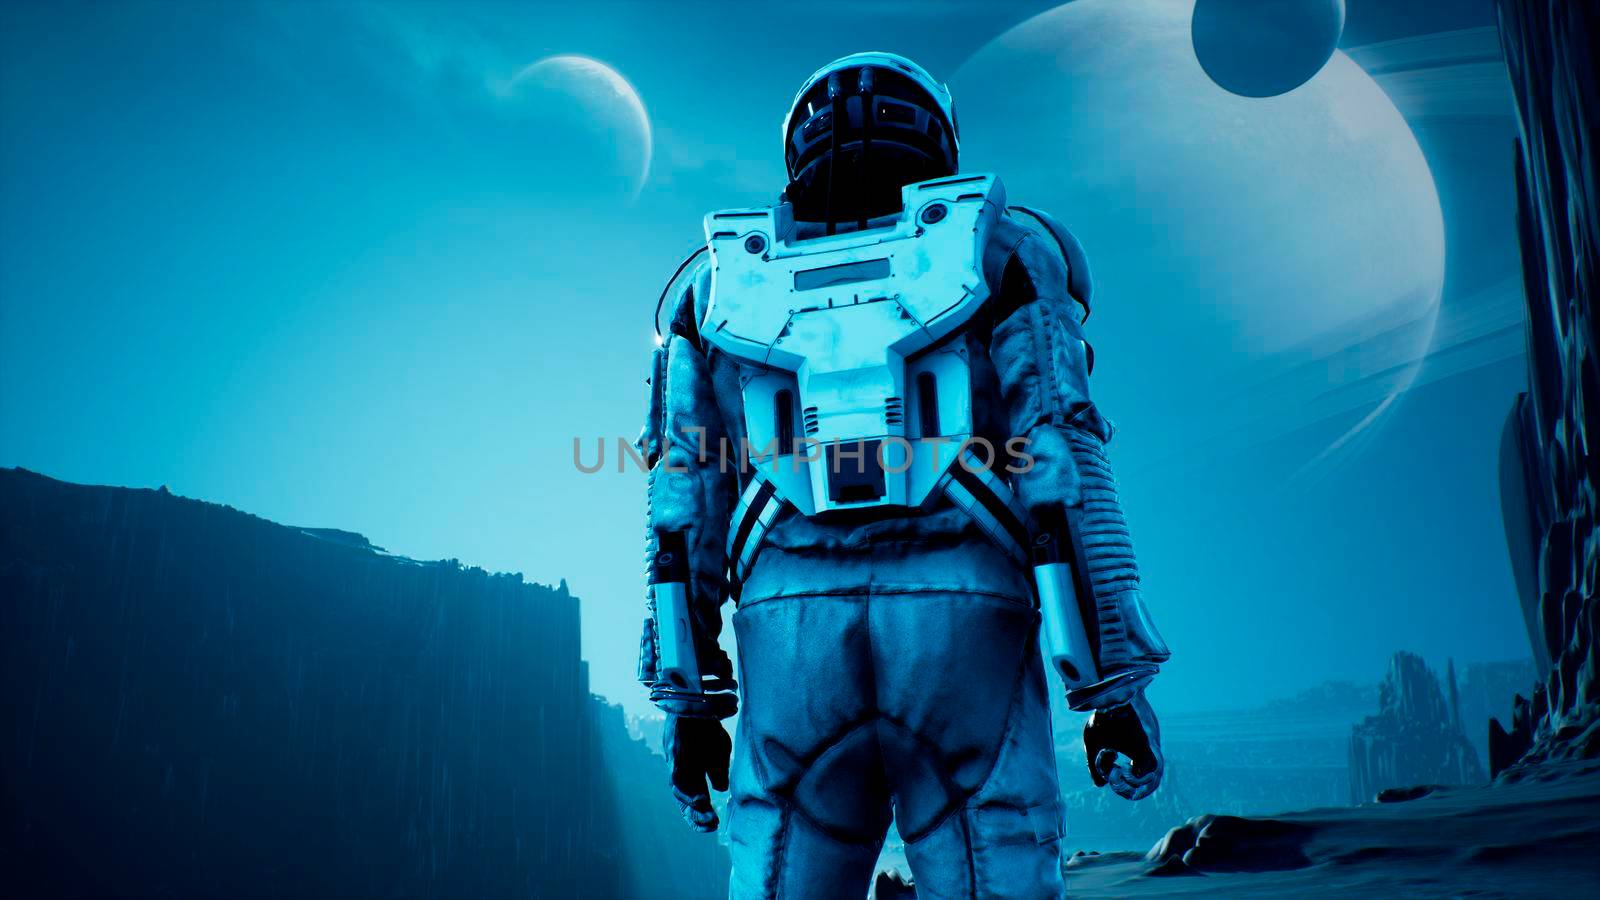 The explorer-astronaut is delighted to have arrived on a beautiful new planet. 3D Rendering. by designprojects